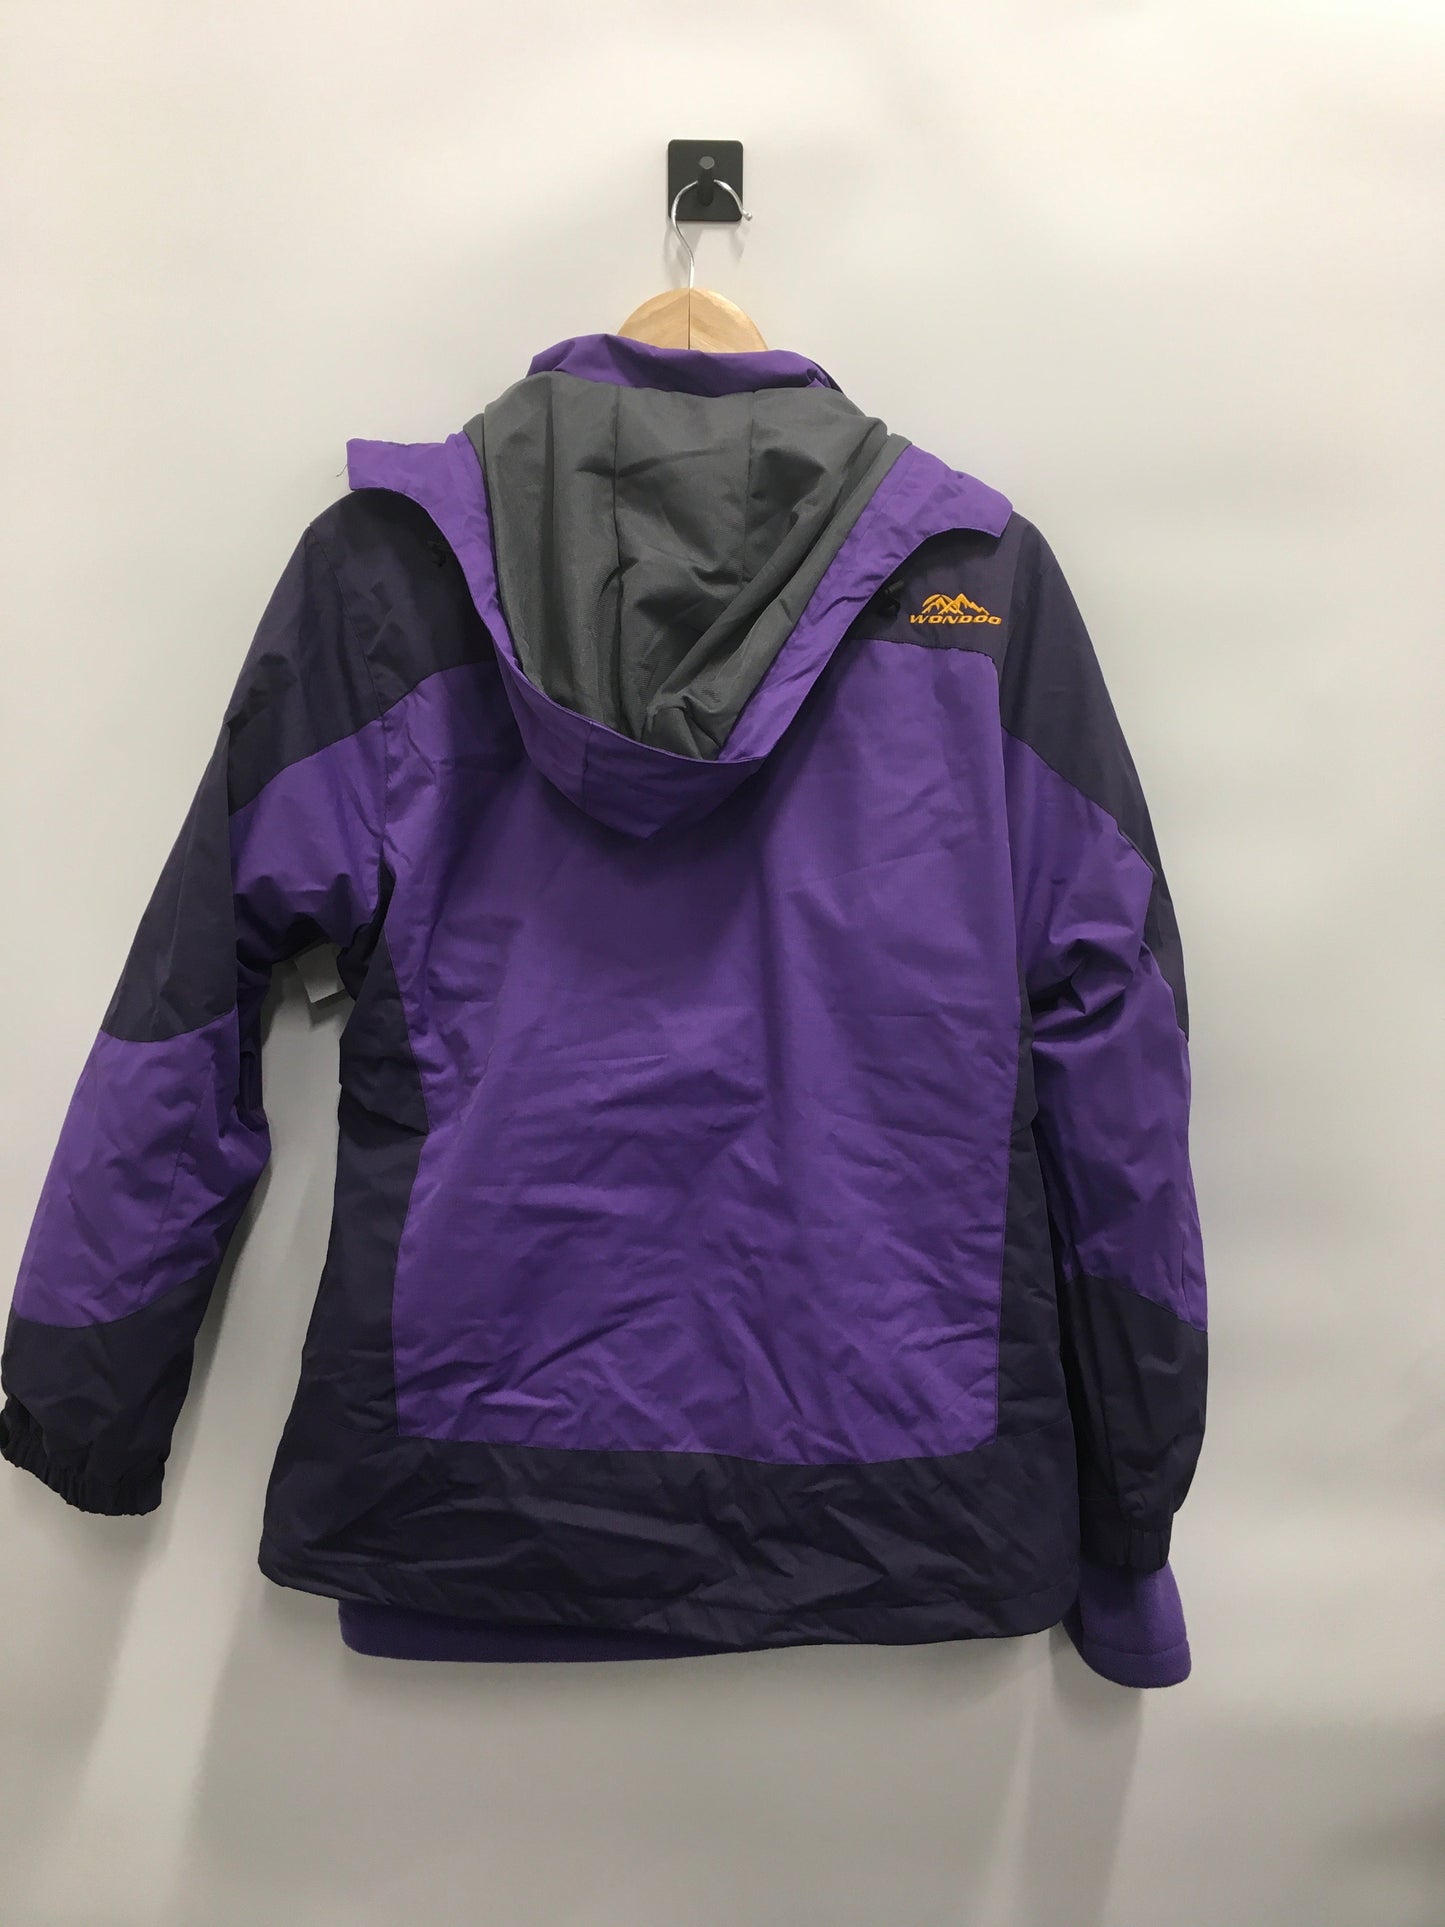 Jacket Windbreaker By Clothes Mentor  Size: L